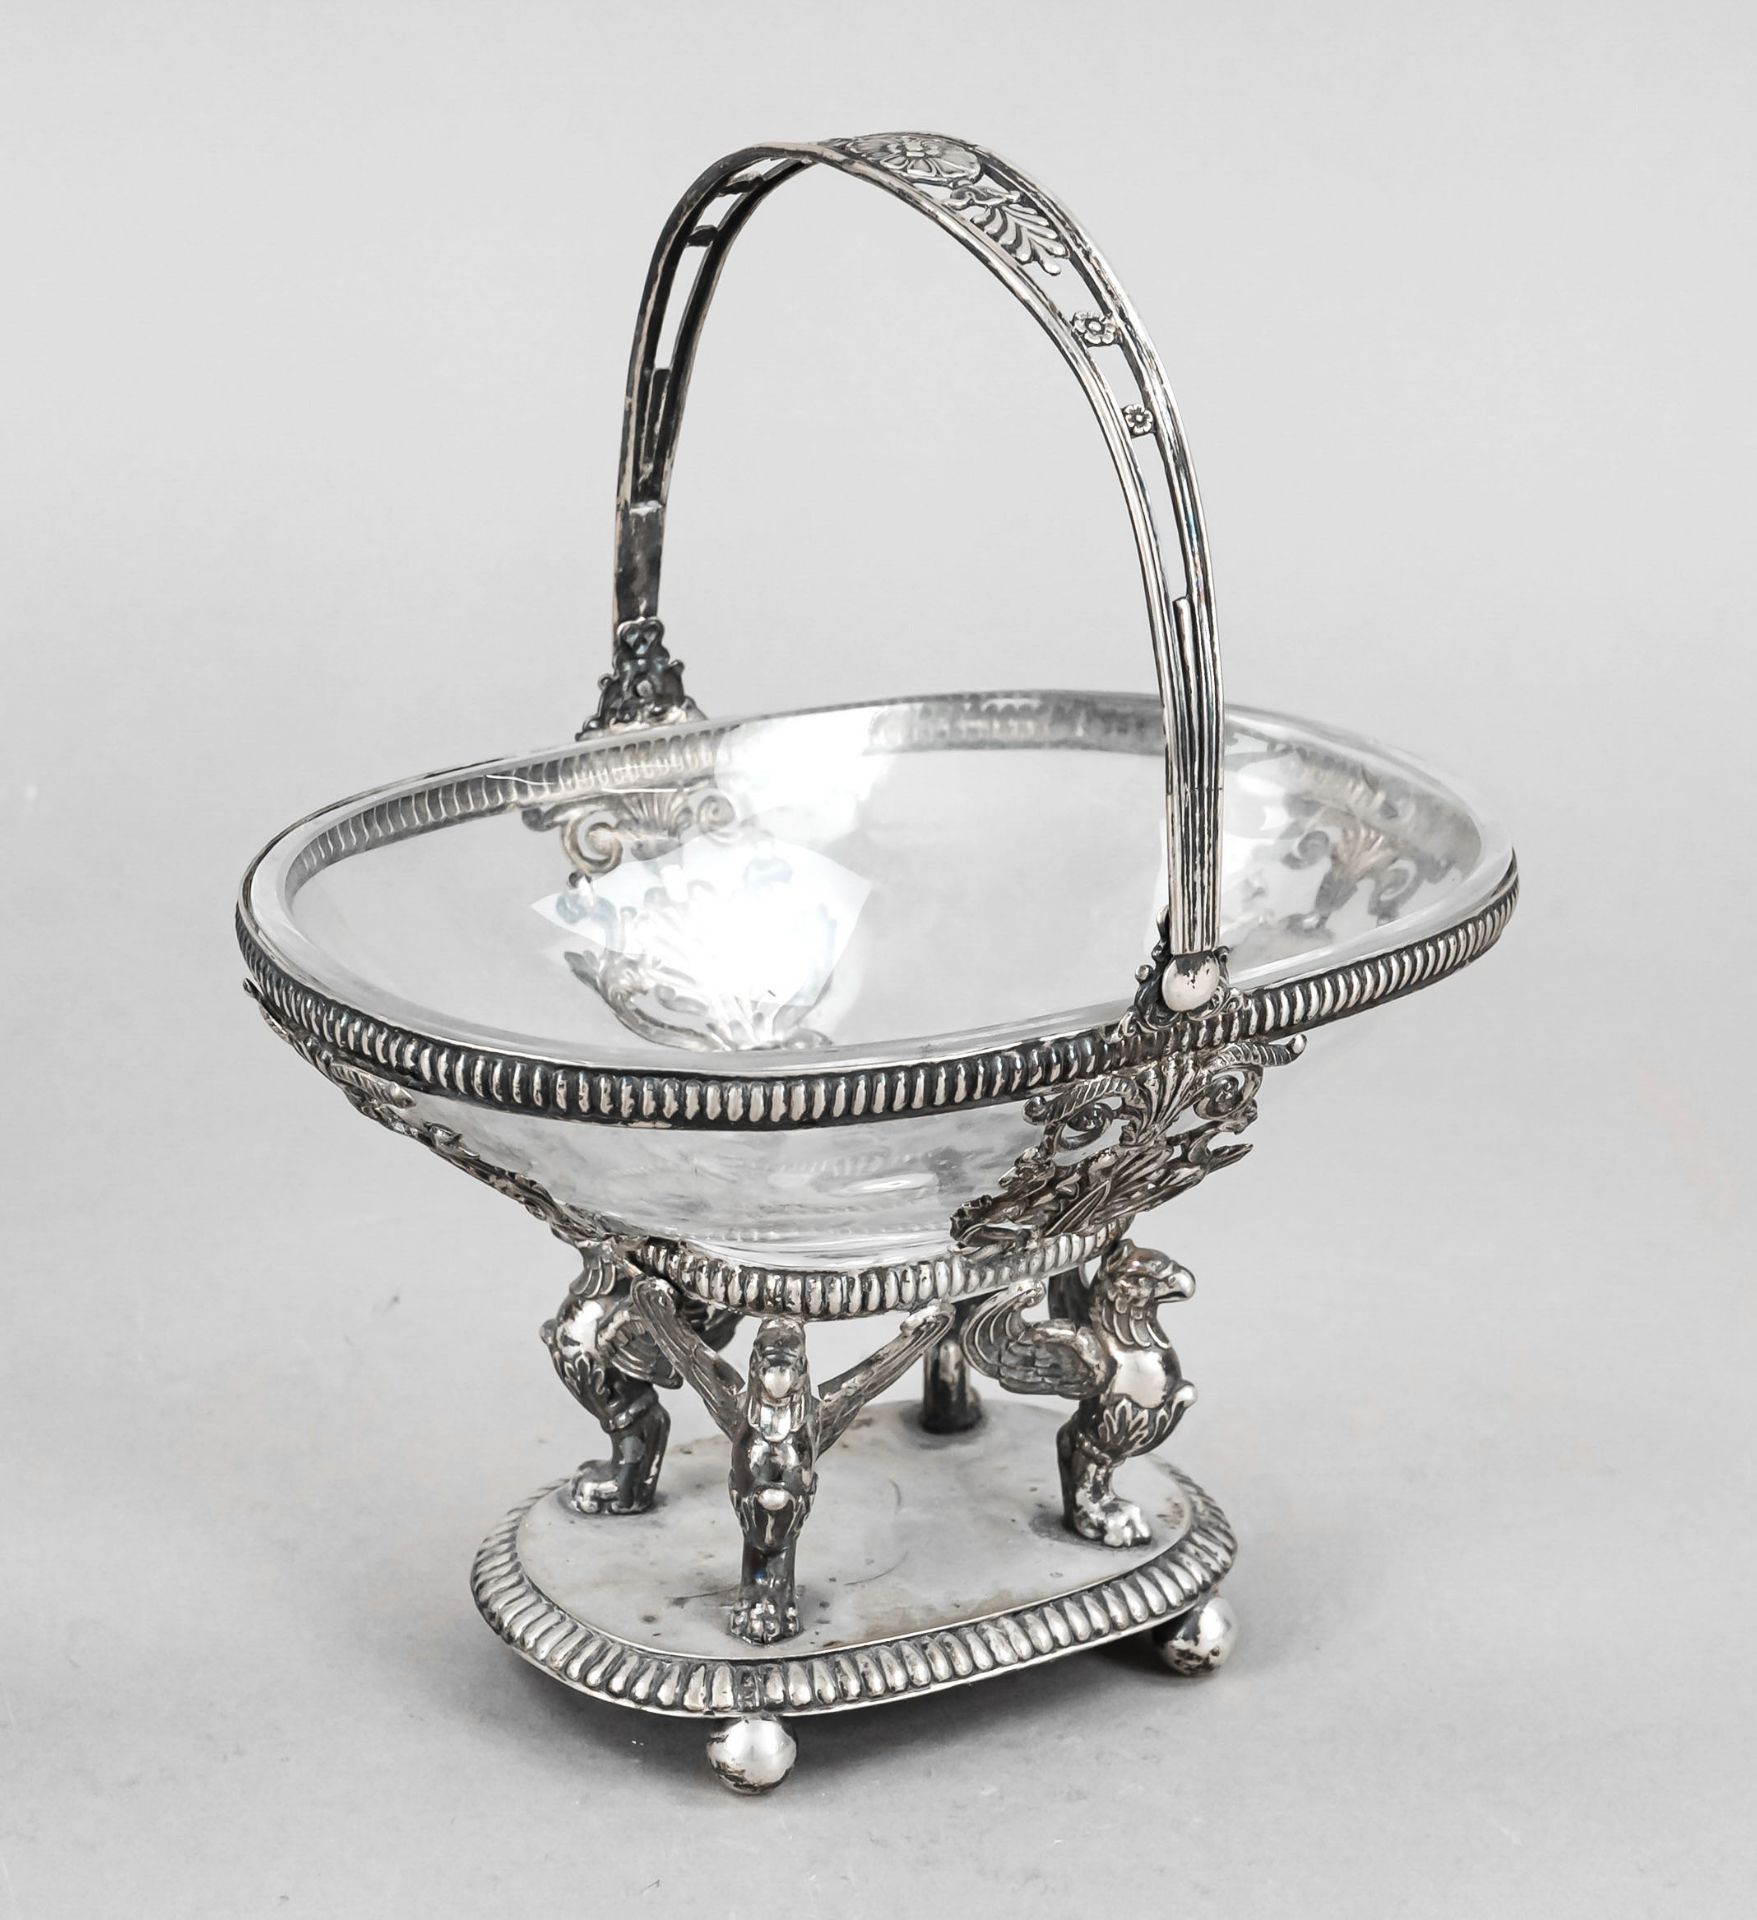 Empire centerpiece, probably German, early 19th century, maker's mark P. B. & C., silver 13